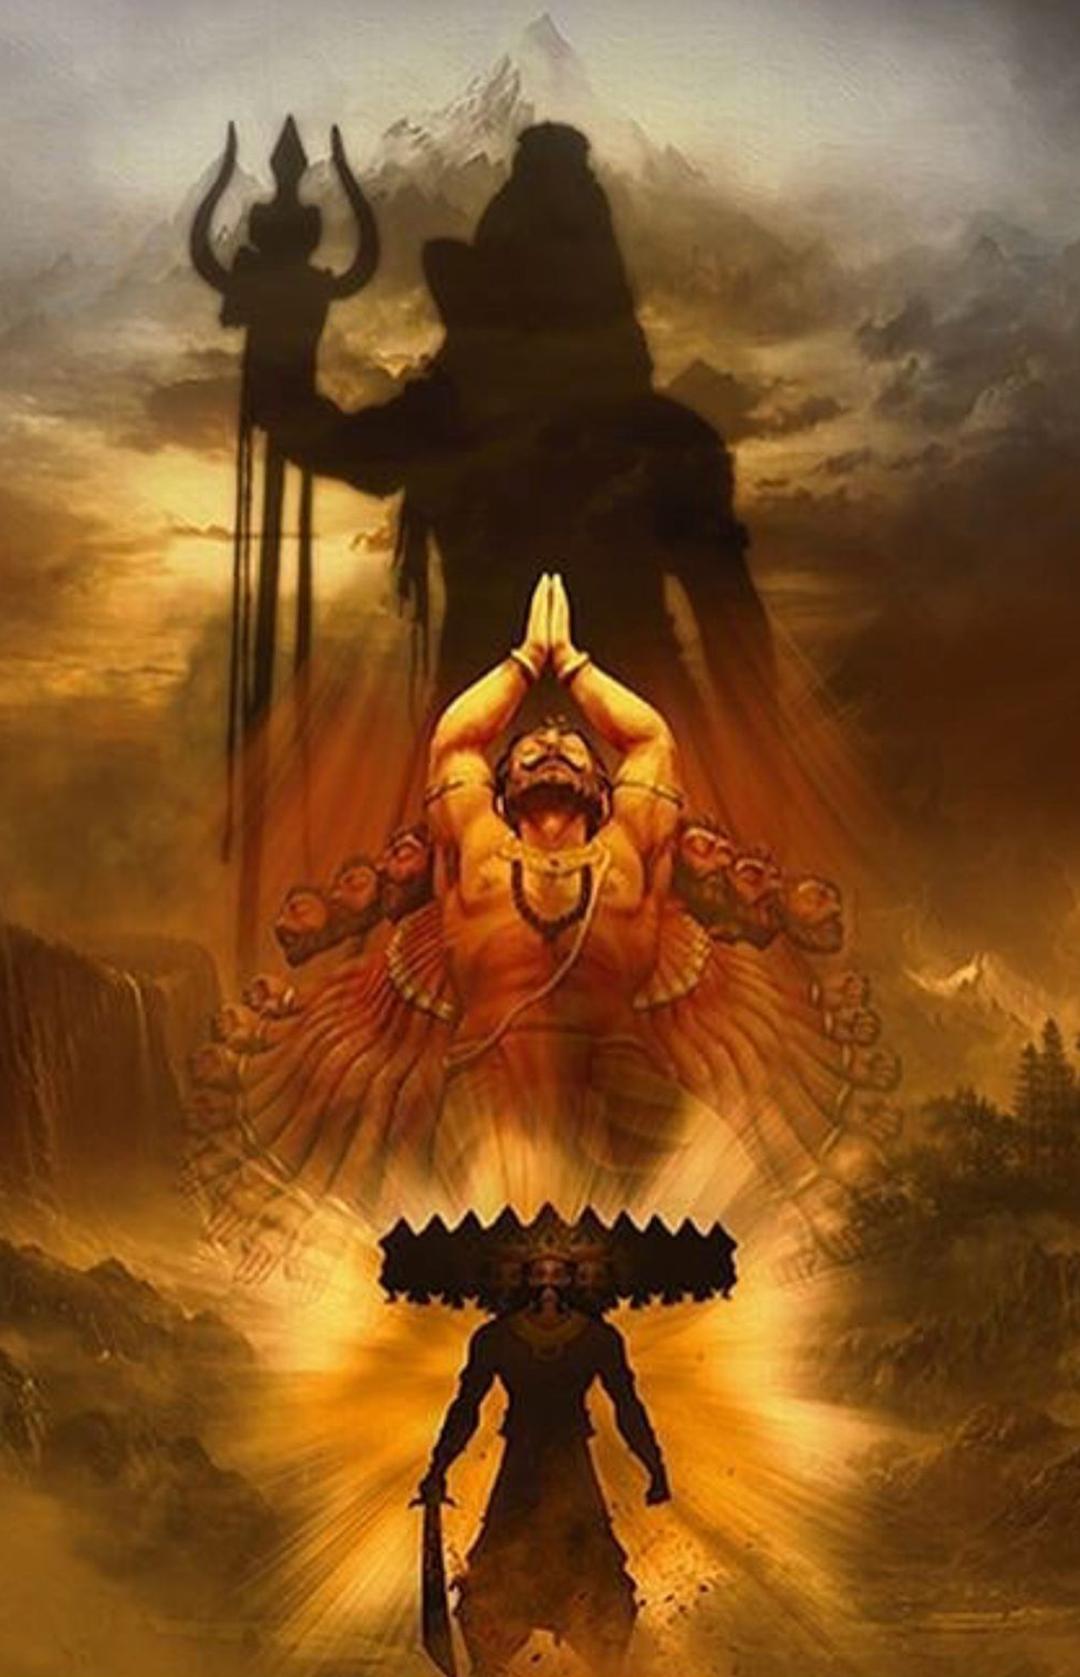 Mahakal Hd Wallpapers 2018 For Android Apk Download